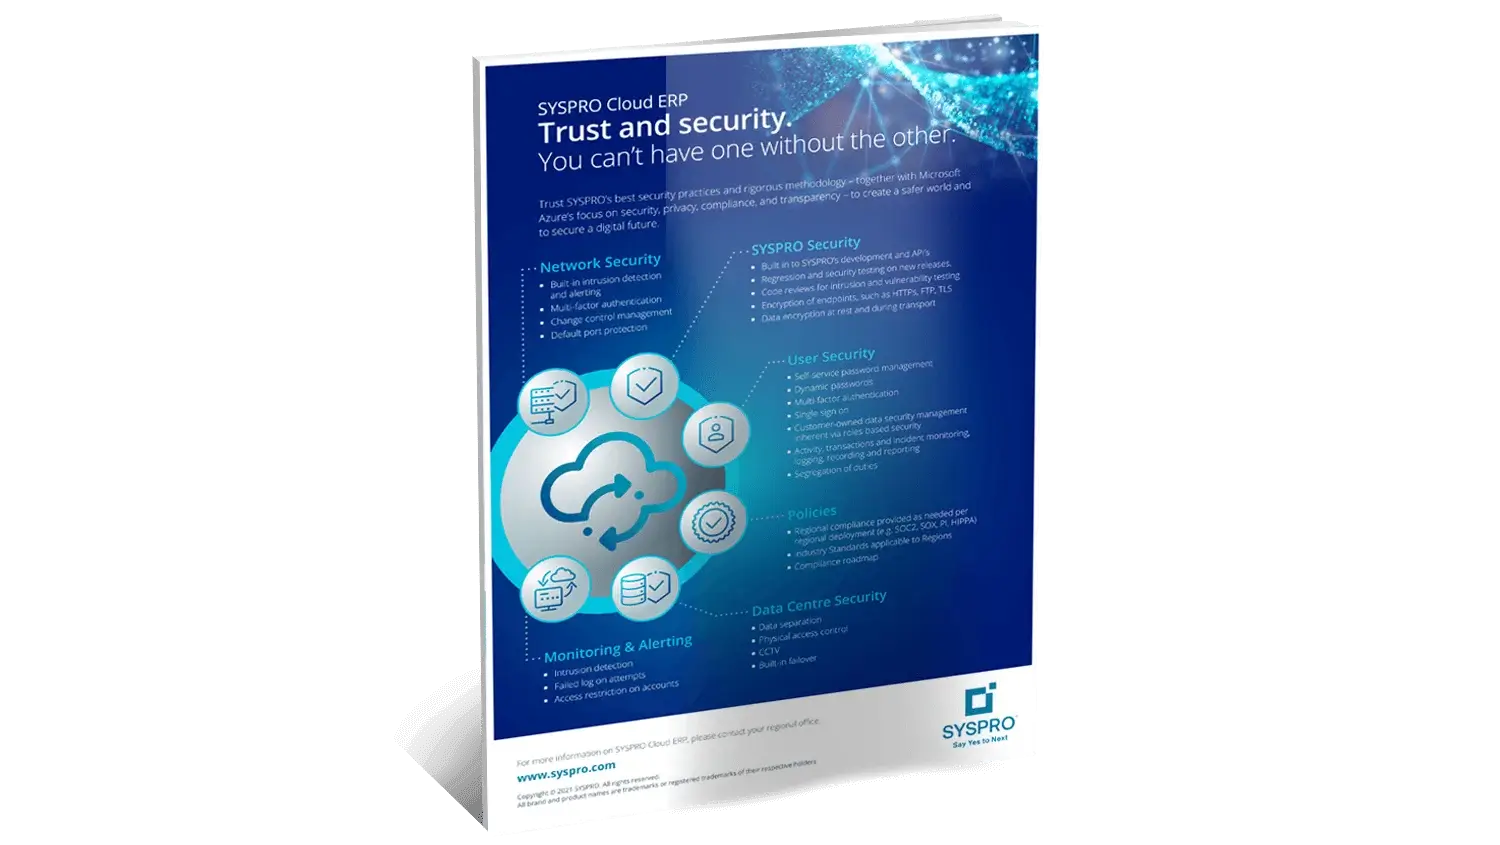 Cloud ERP Security infographic - SYSPRO ERP Software